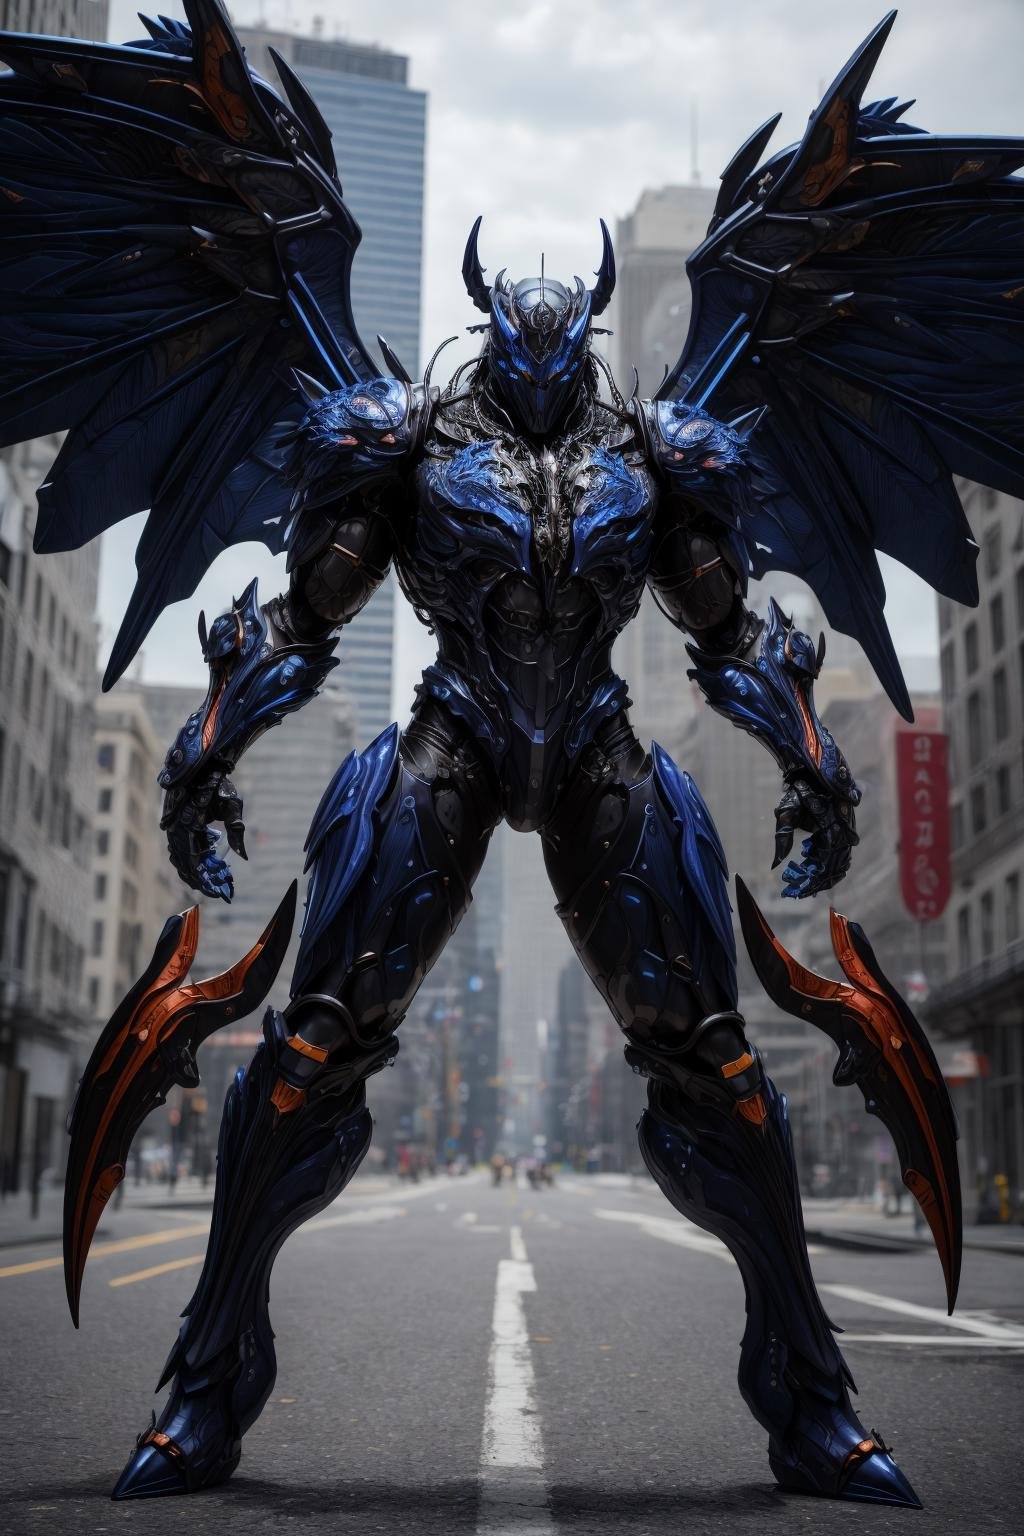 <lora:hades_armor_v3:0.7>masterpice, highly detailed photorealistic raw photography, best quality, volumetric lighting, volumetric shadows1boy in Indigo Blue hades_armor, musculated body, monster form, claws, metal demon wings, armor reflexions, leaning forwardsteampunk city background with multicolor flowers